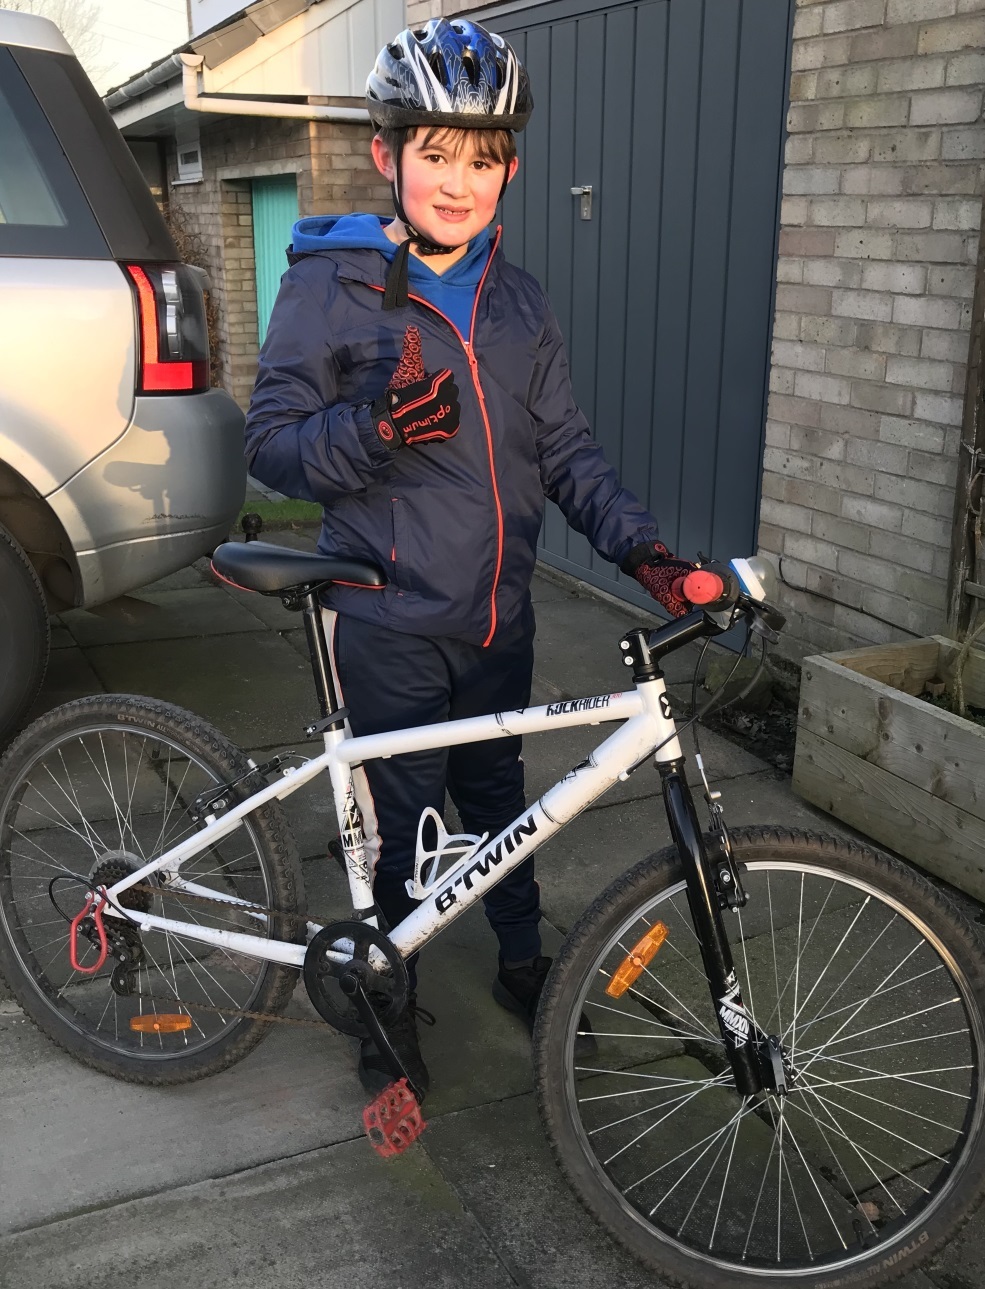 Oliver Kirkham riding 100 miles to raise funds for the NHS